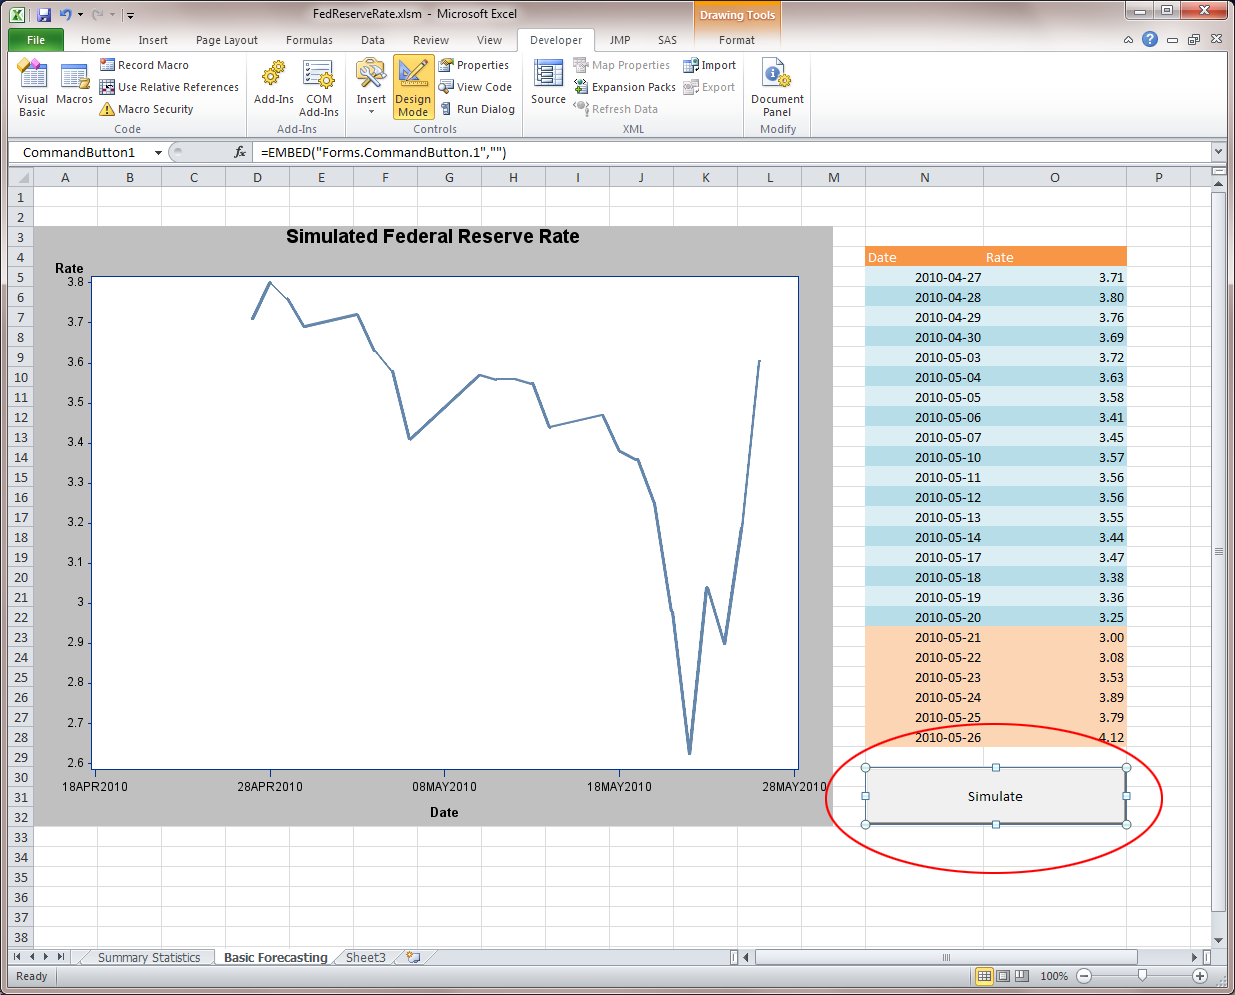 New Simulate button in the Basic Forecasting worksheet